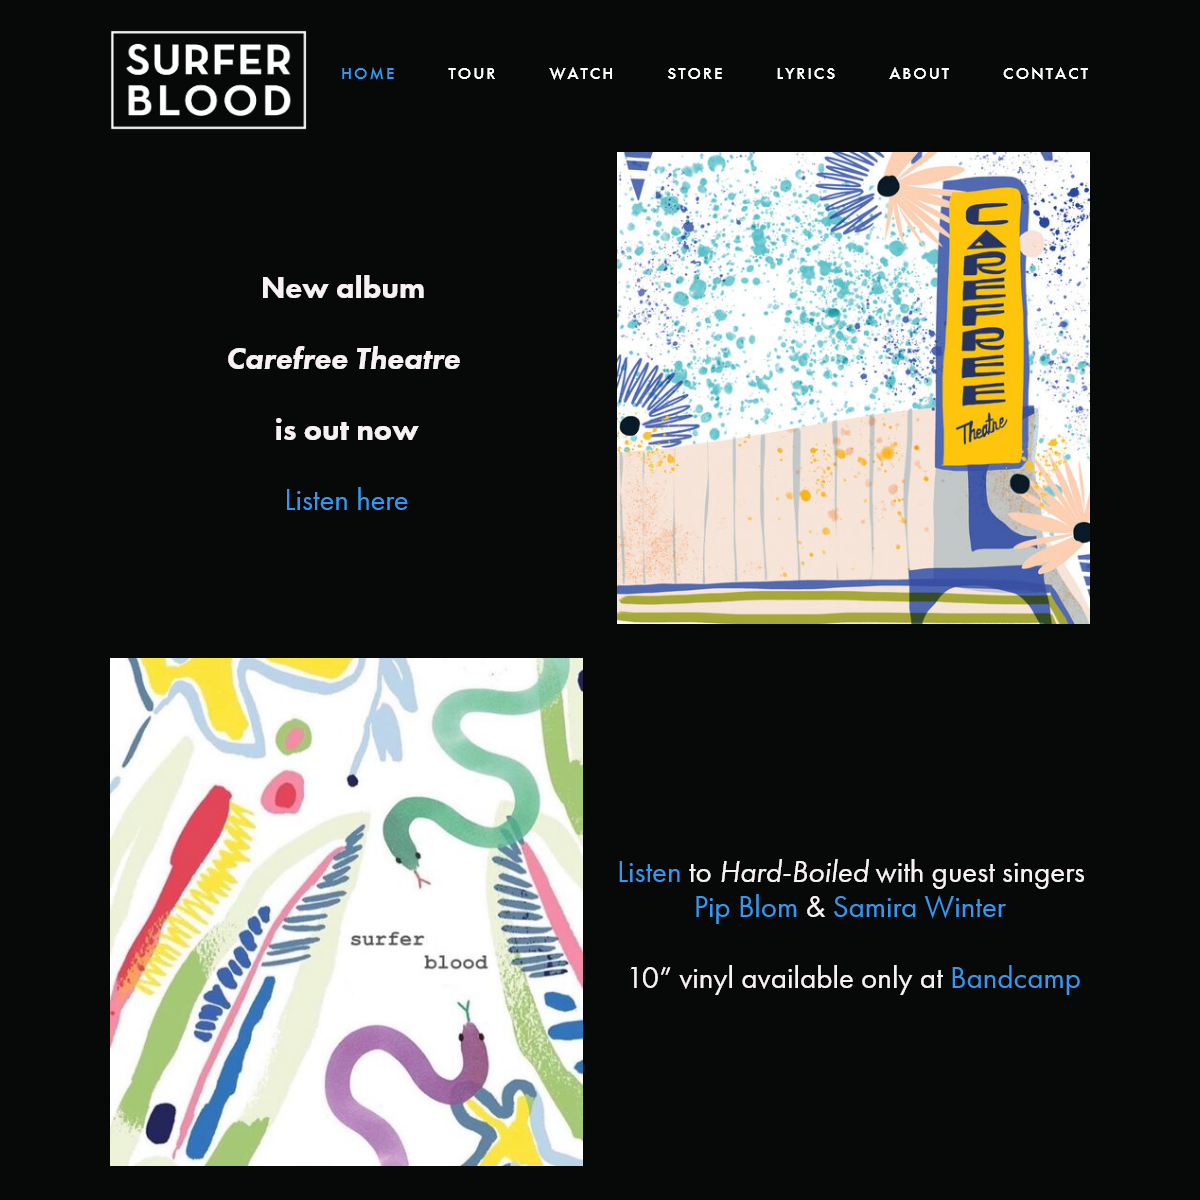 A complete backup of surferblood.com